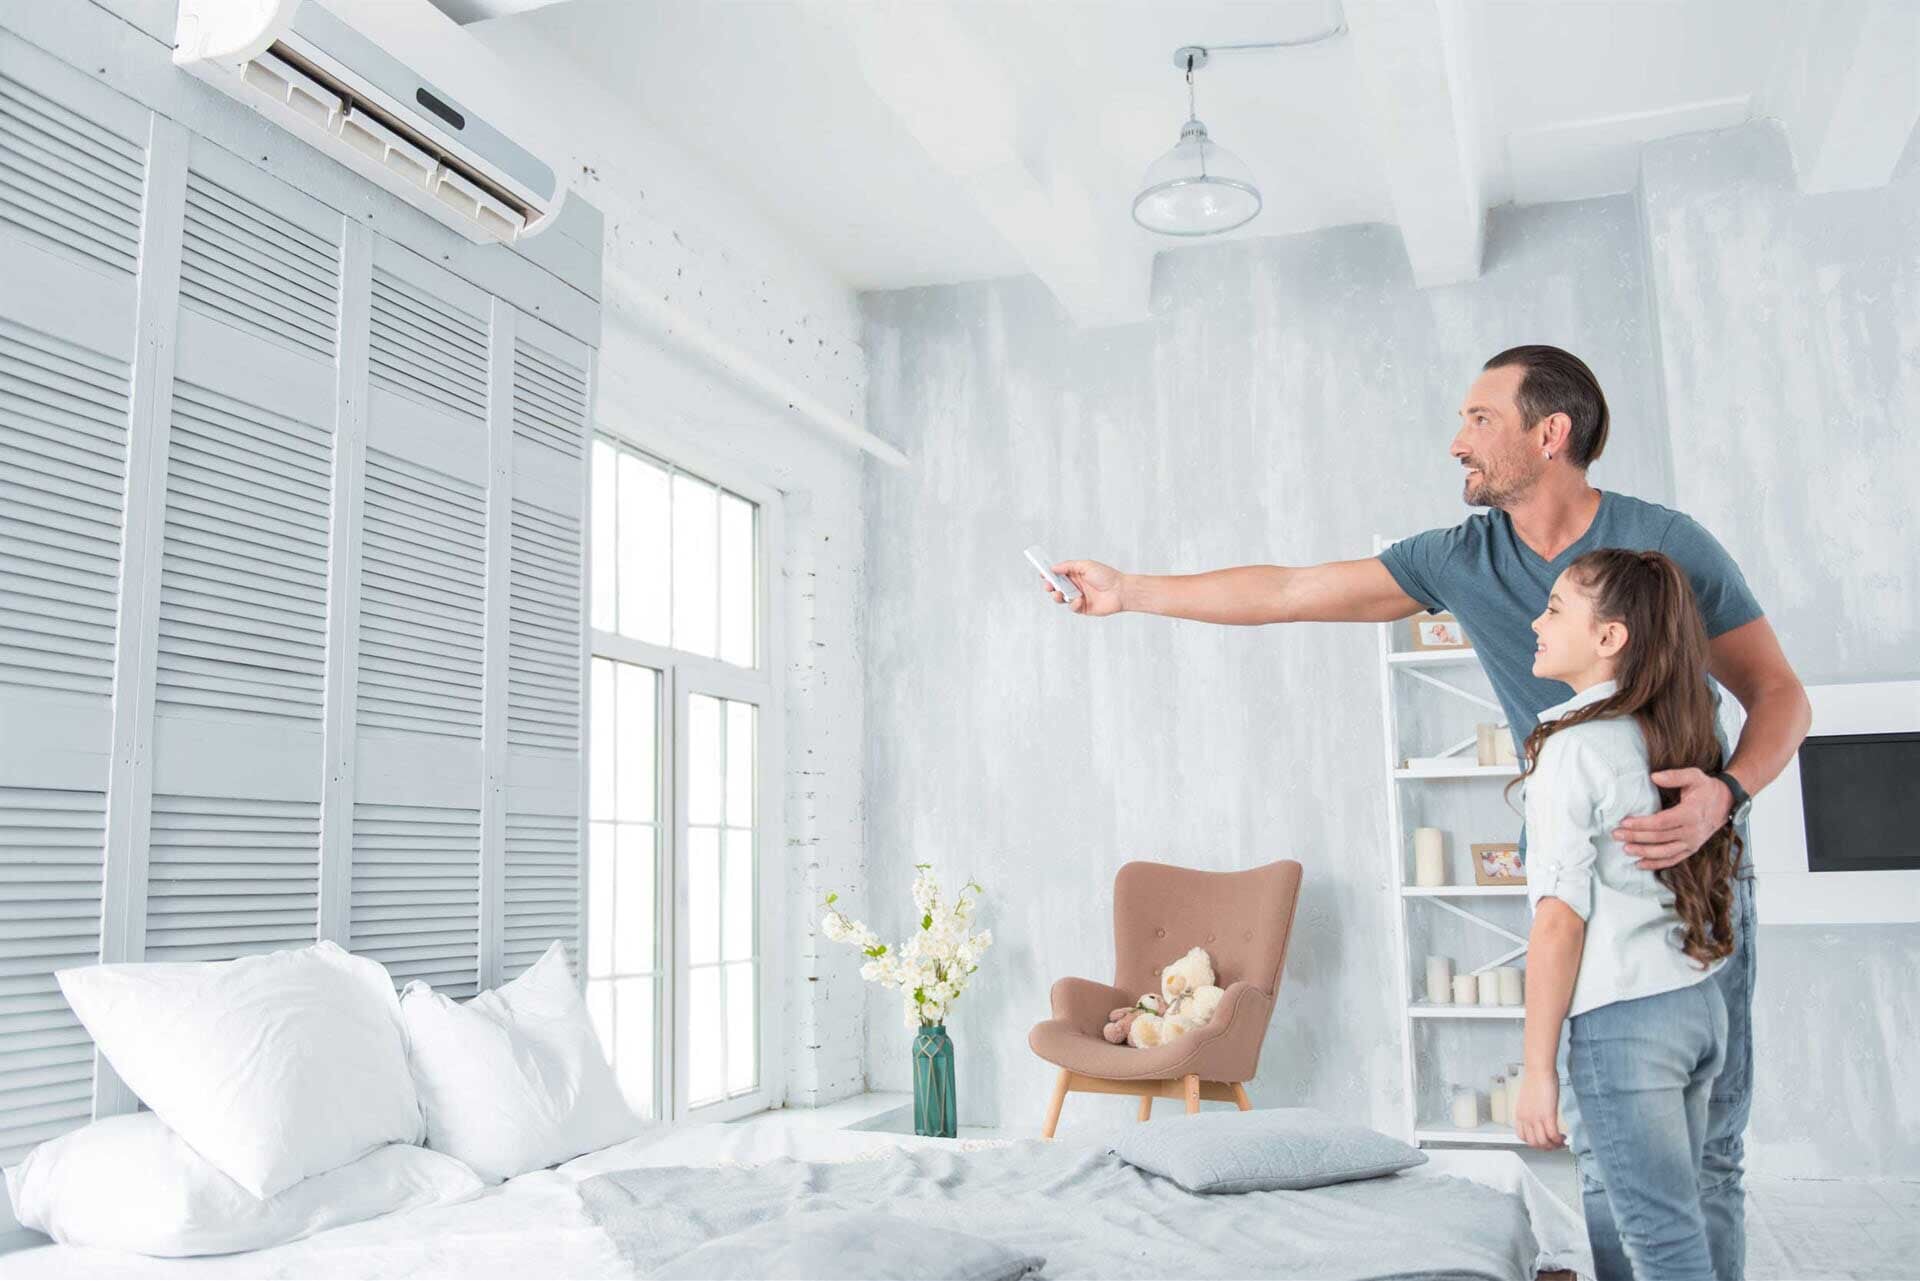 Man operating Air Condition — Residential & Commercial Airconditioning Repair in Batemans Bay, NSW